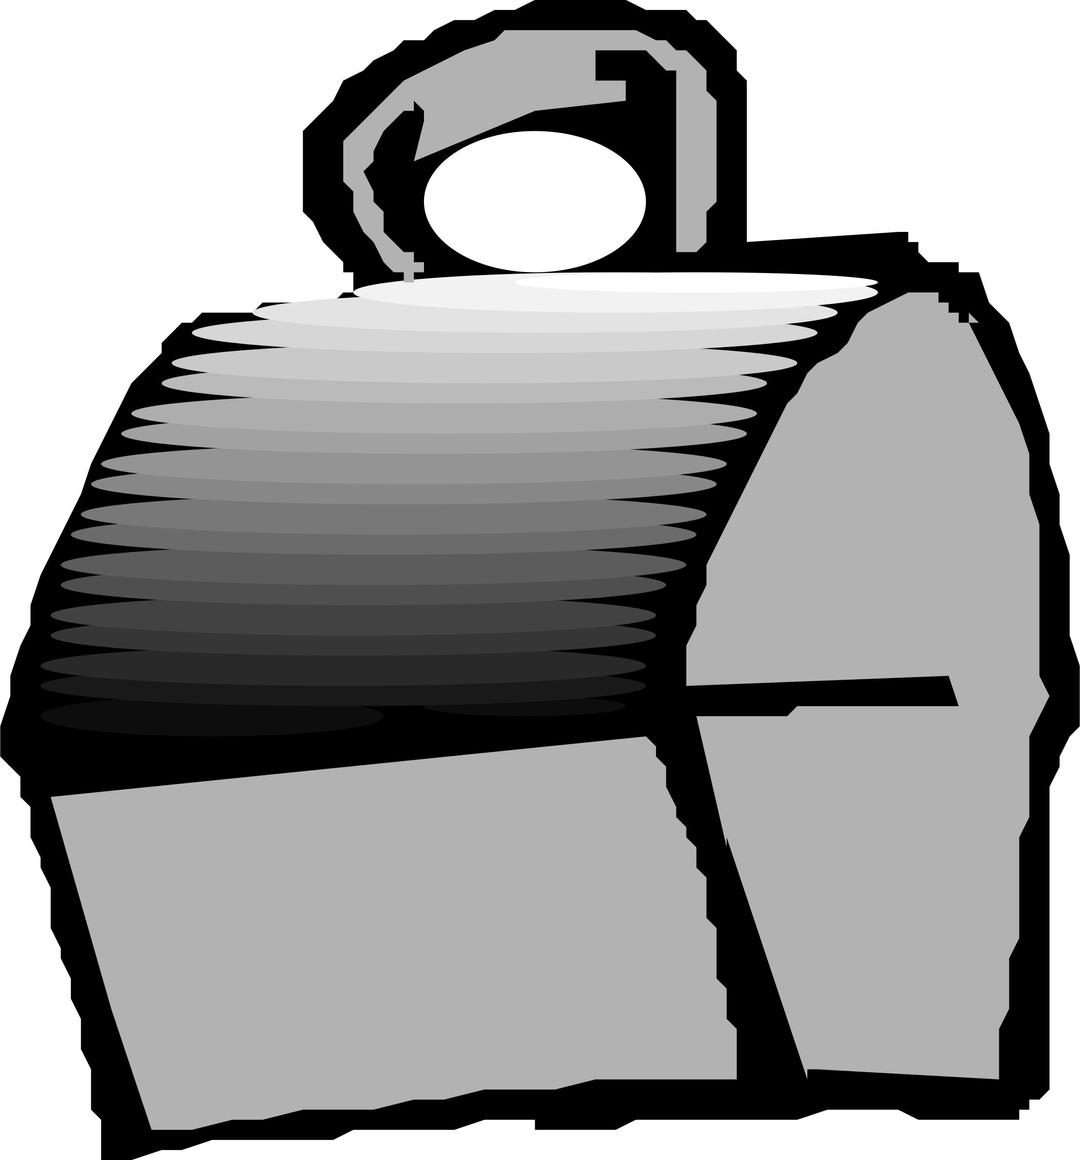 A traditional lunch box png transparent